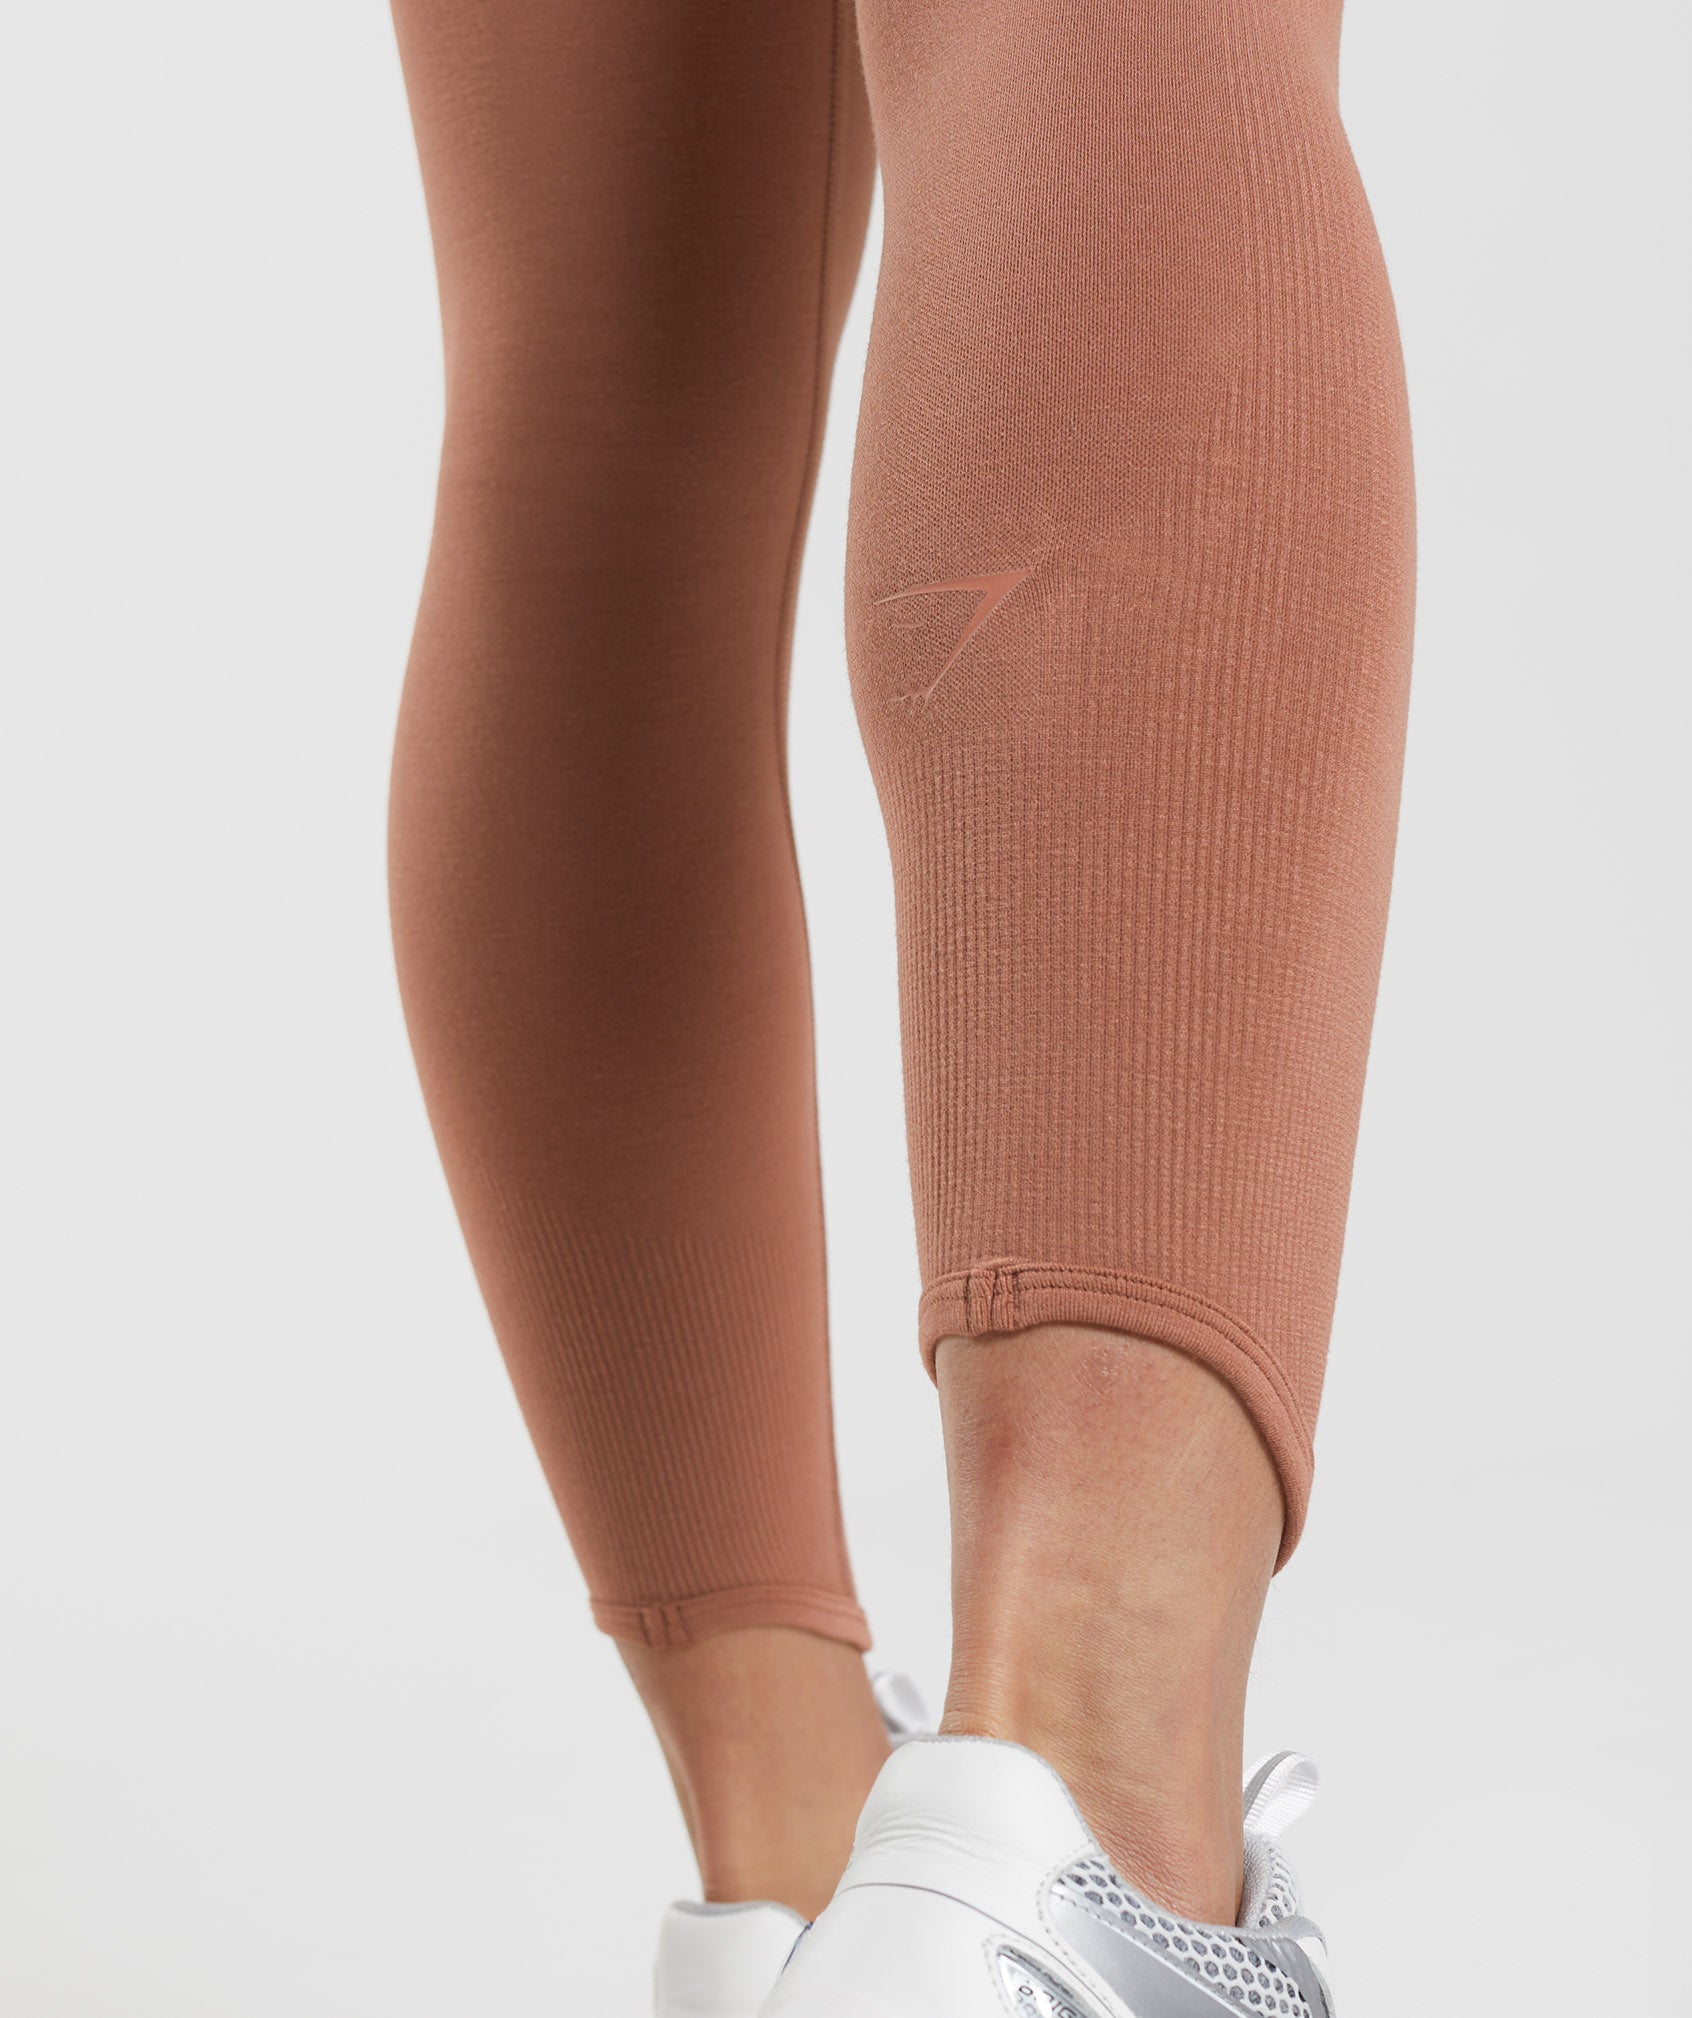 Rest Day Seamless Leggings in Coffee Brown - view 6